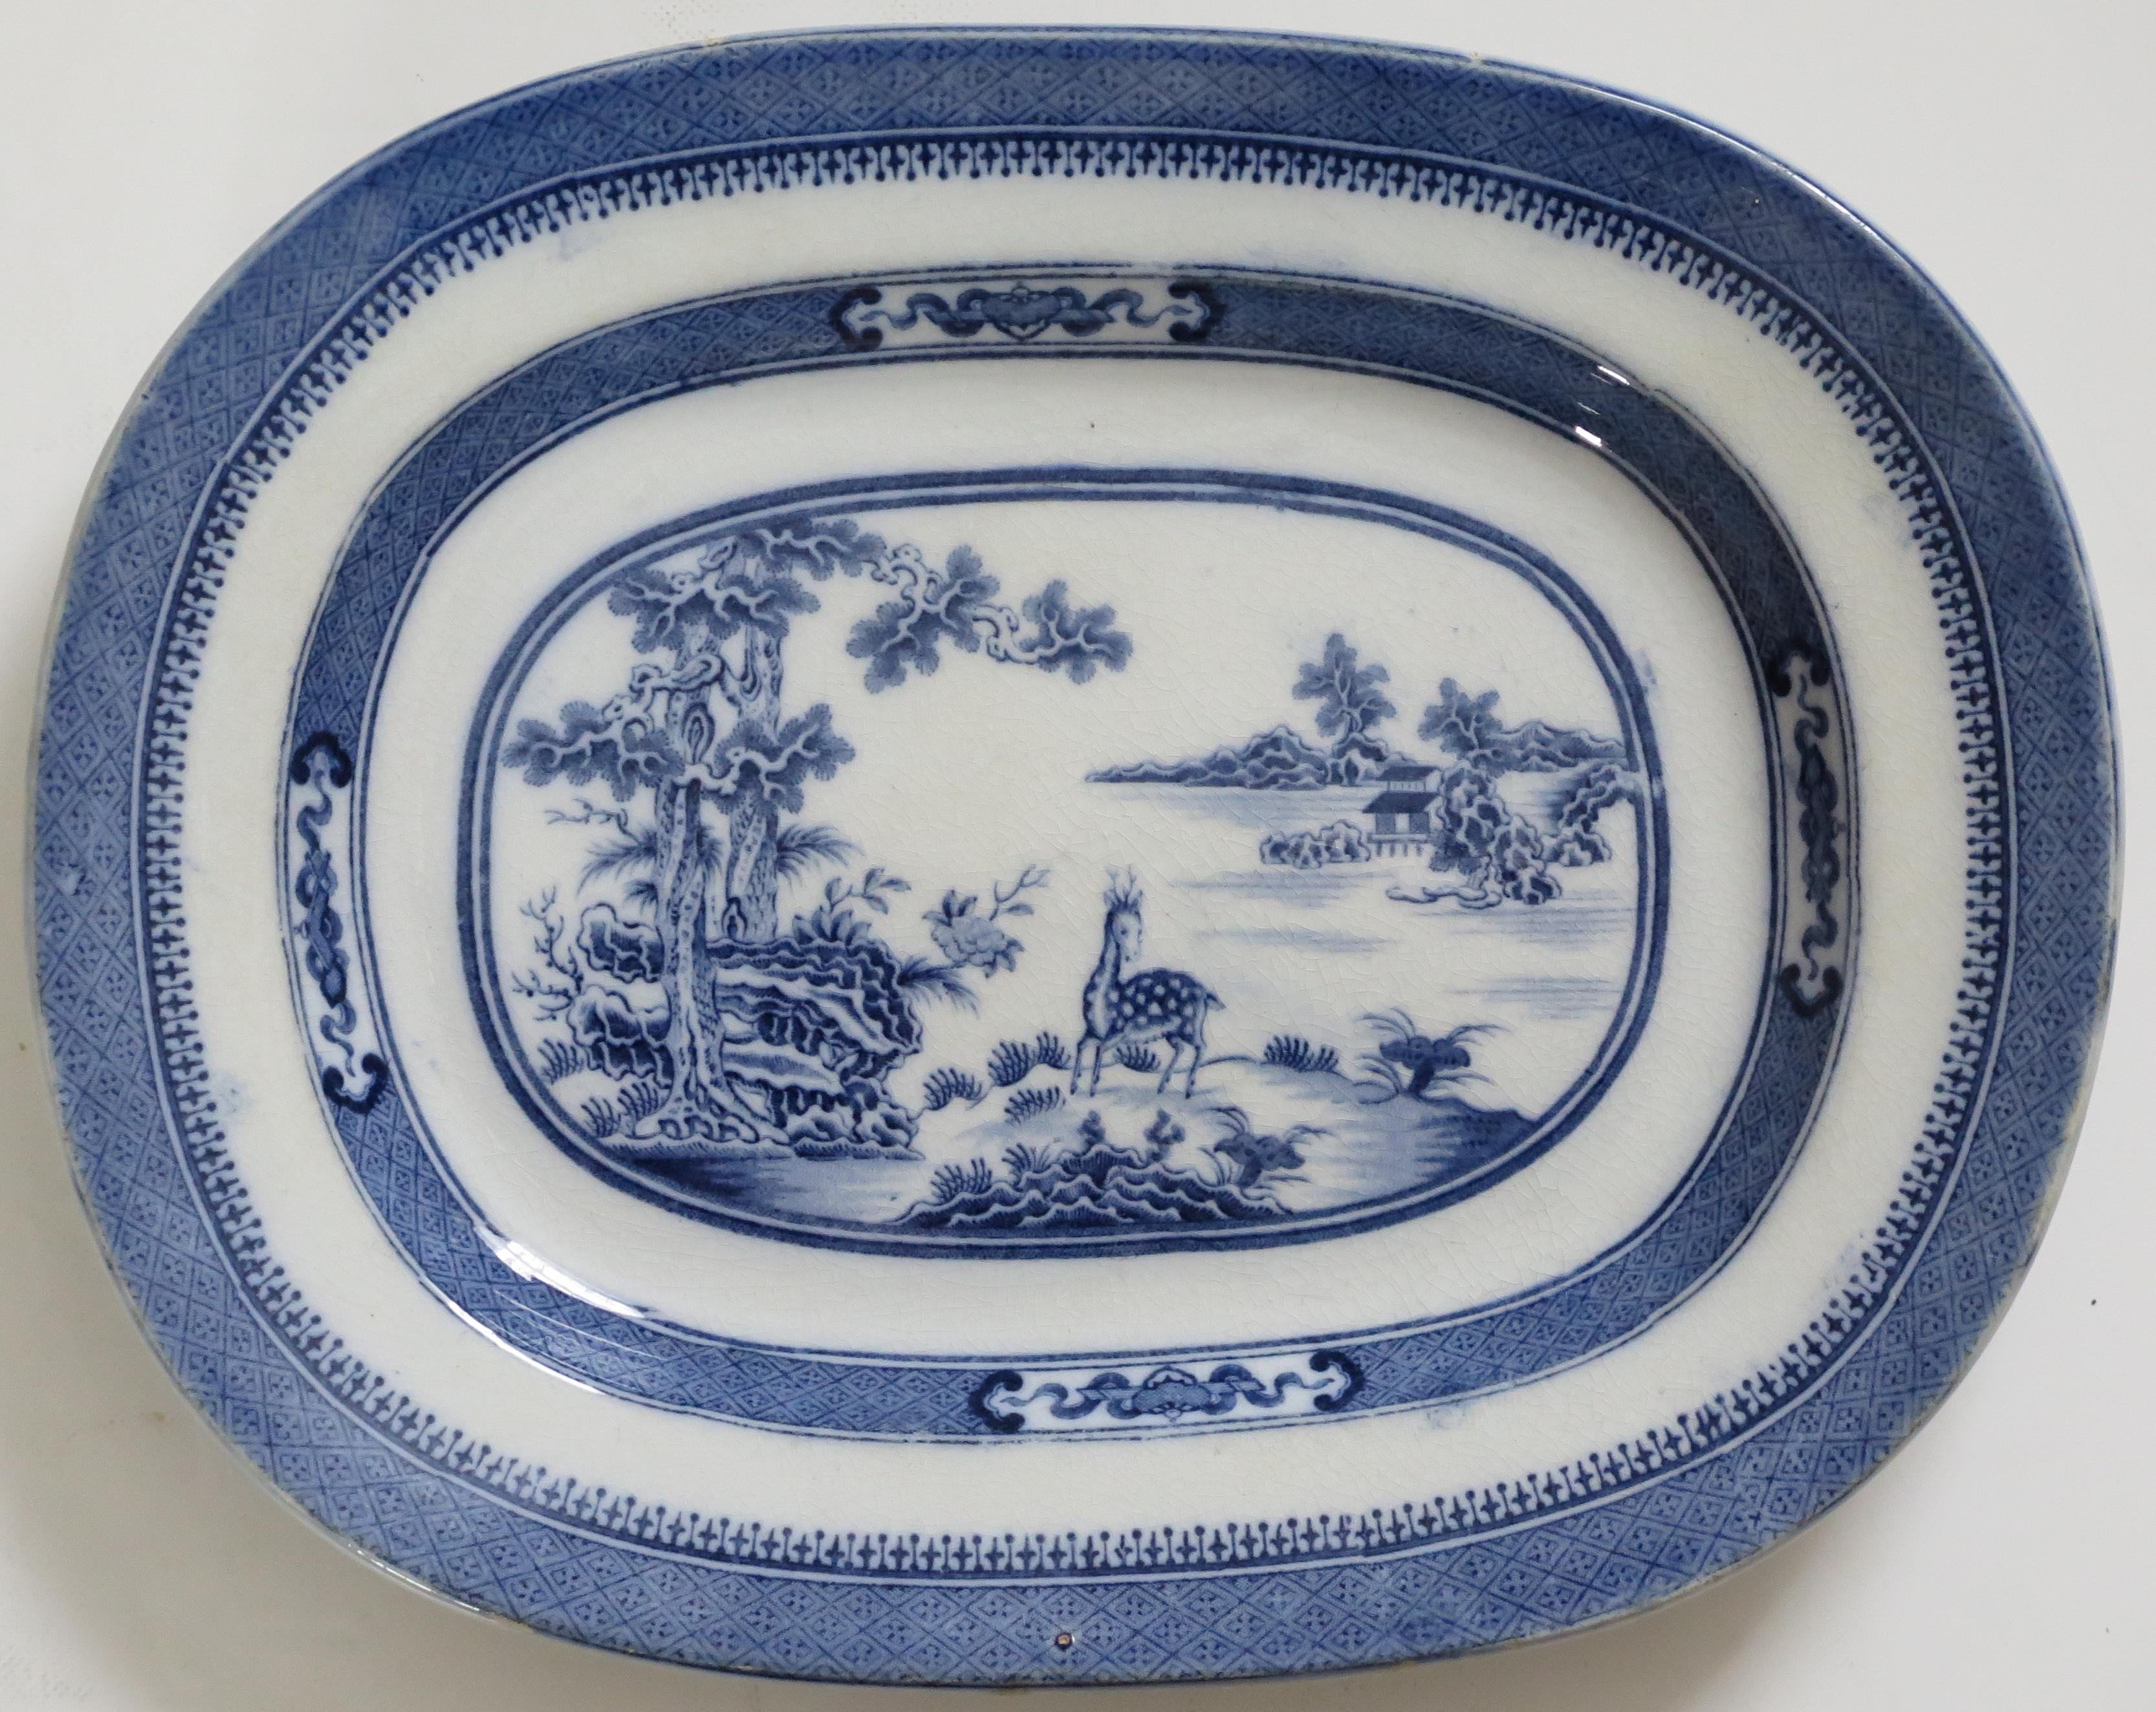 Georgian Early 19th C. Pearlware Blue & White Dish or Plate Chital Deer India Ptn, Ca 1820